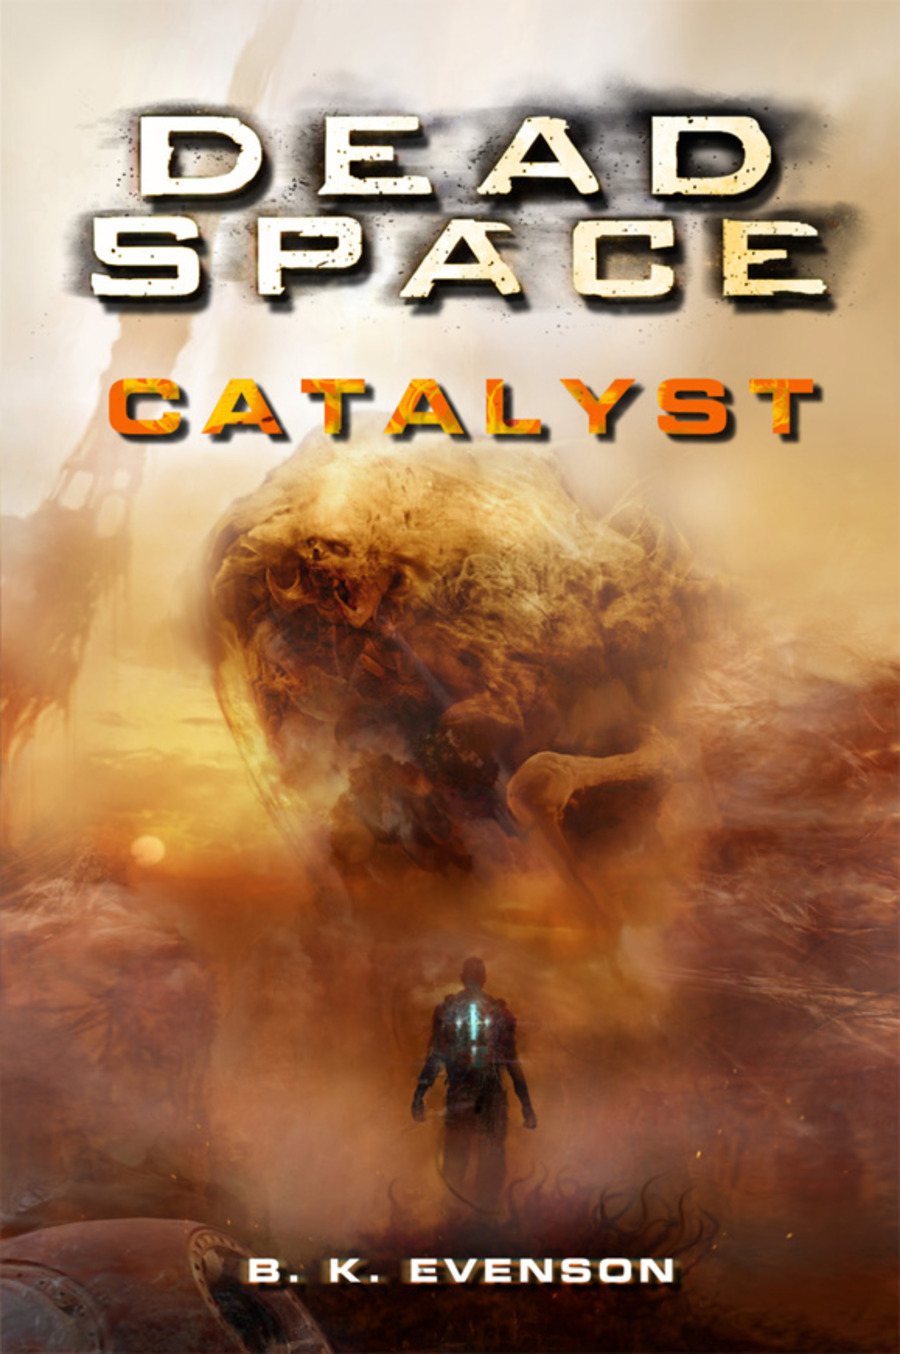 Dead-space-catalyst-1340105780267886